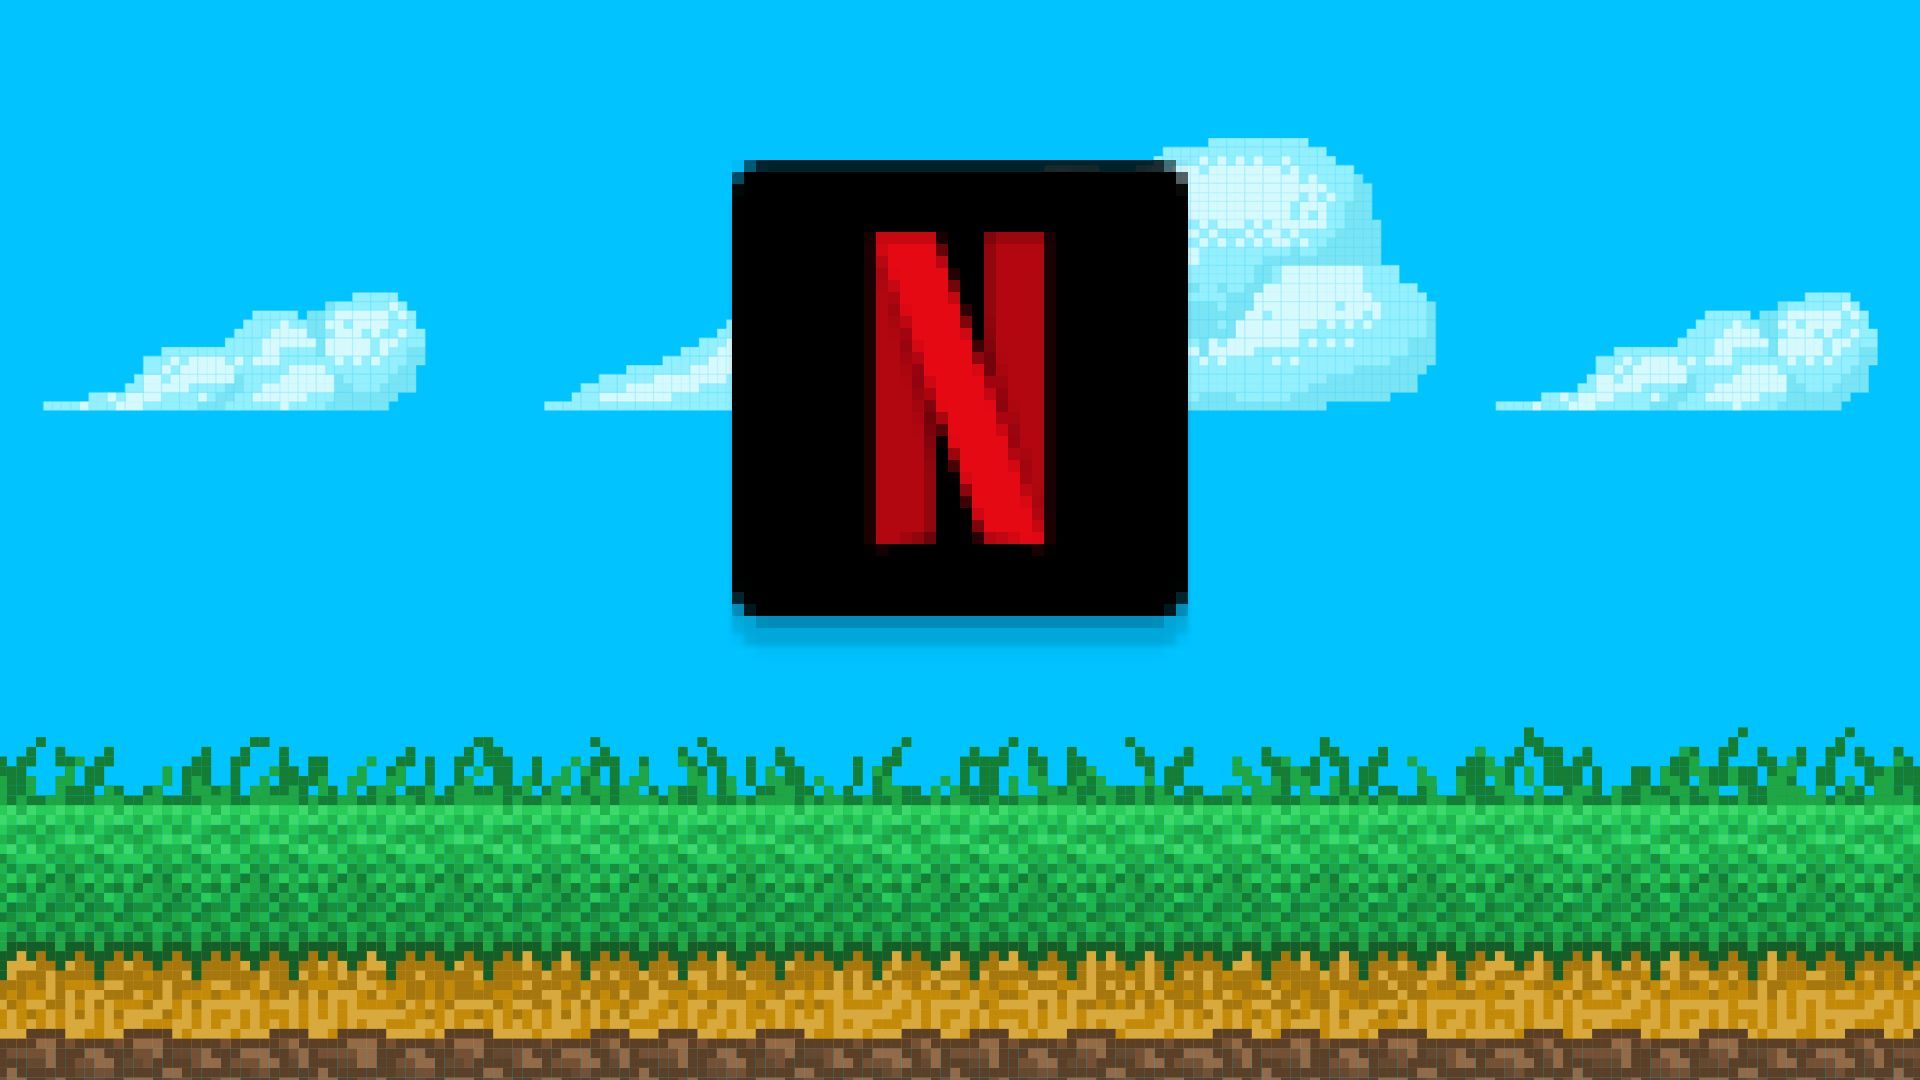 Illustration of an 8-bit video game screen with a Netflix logo.